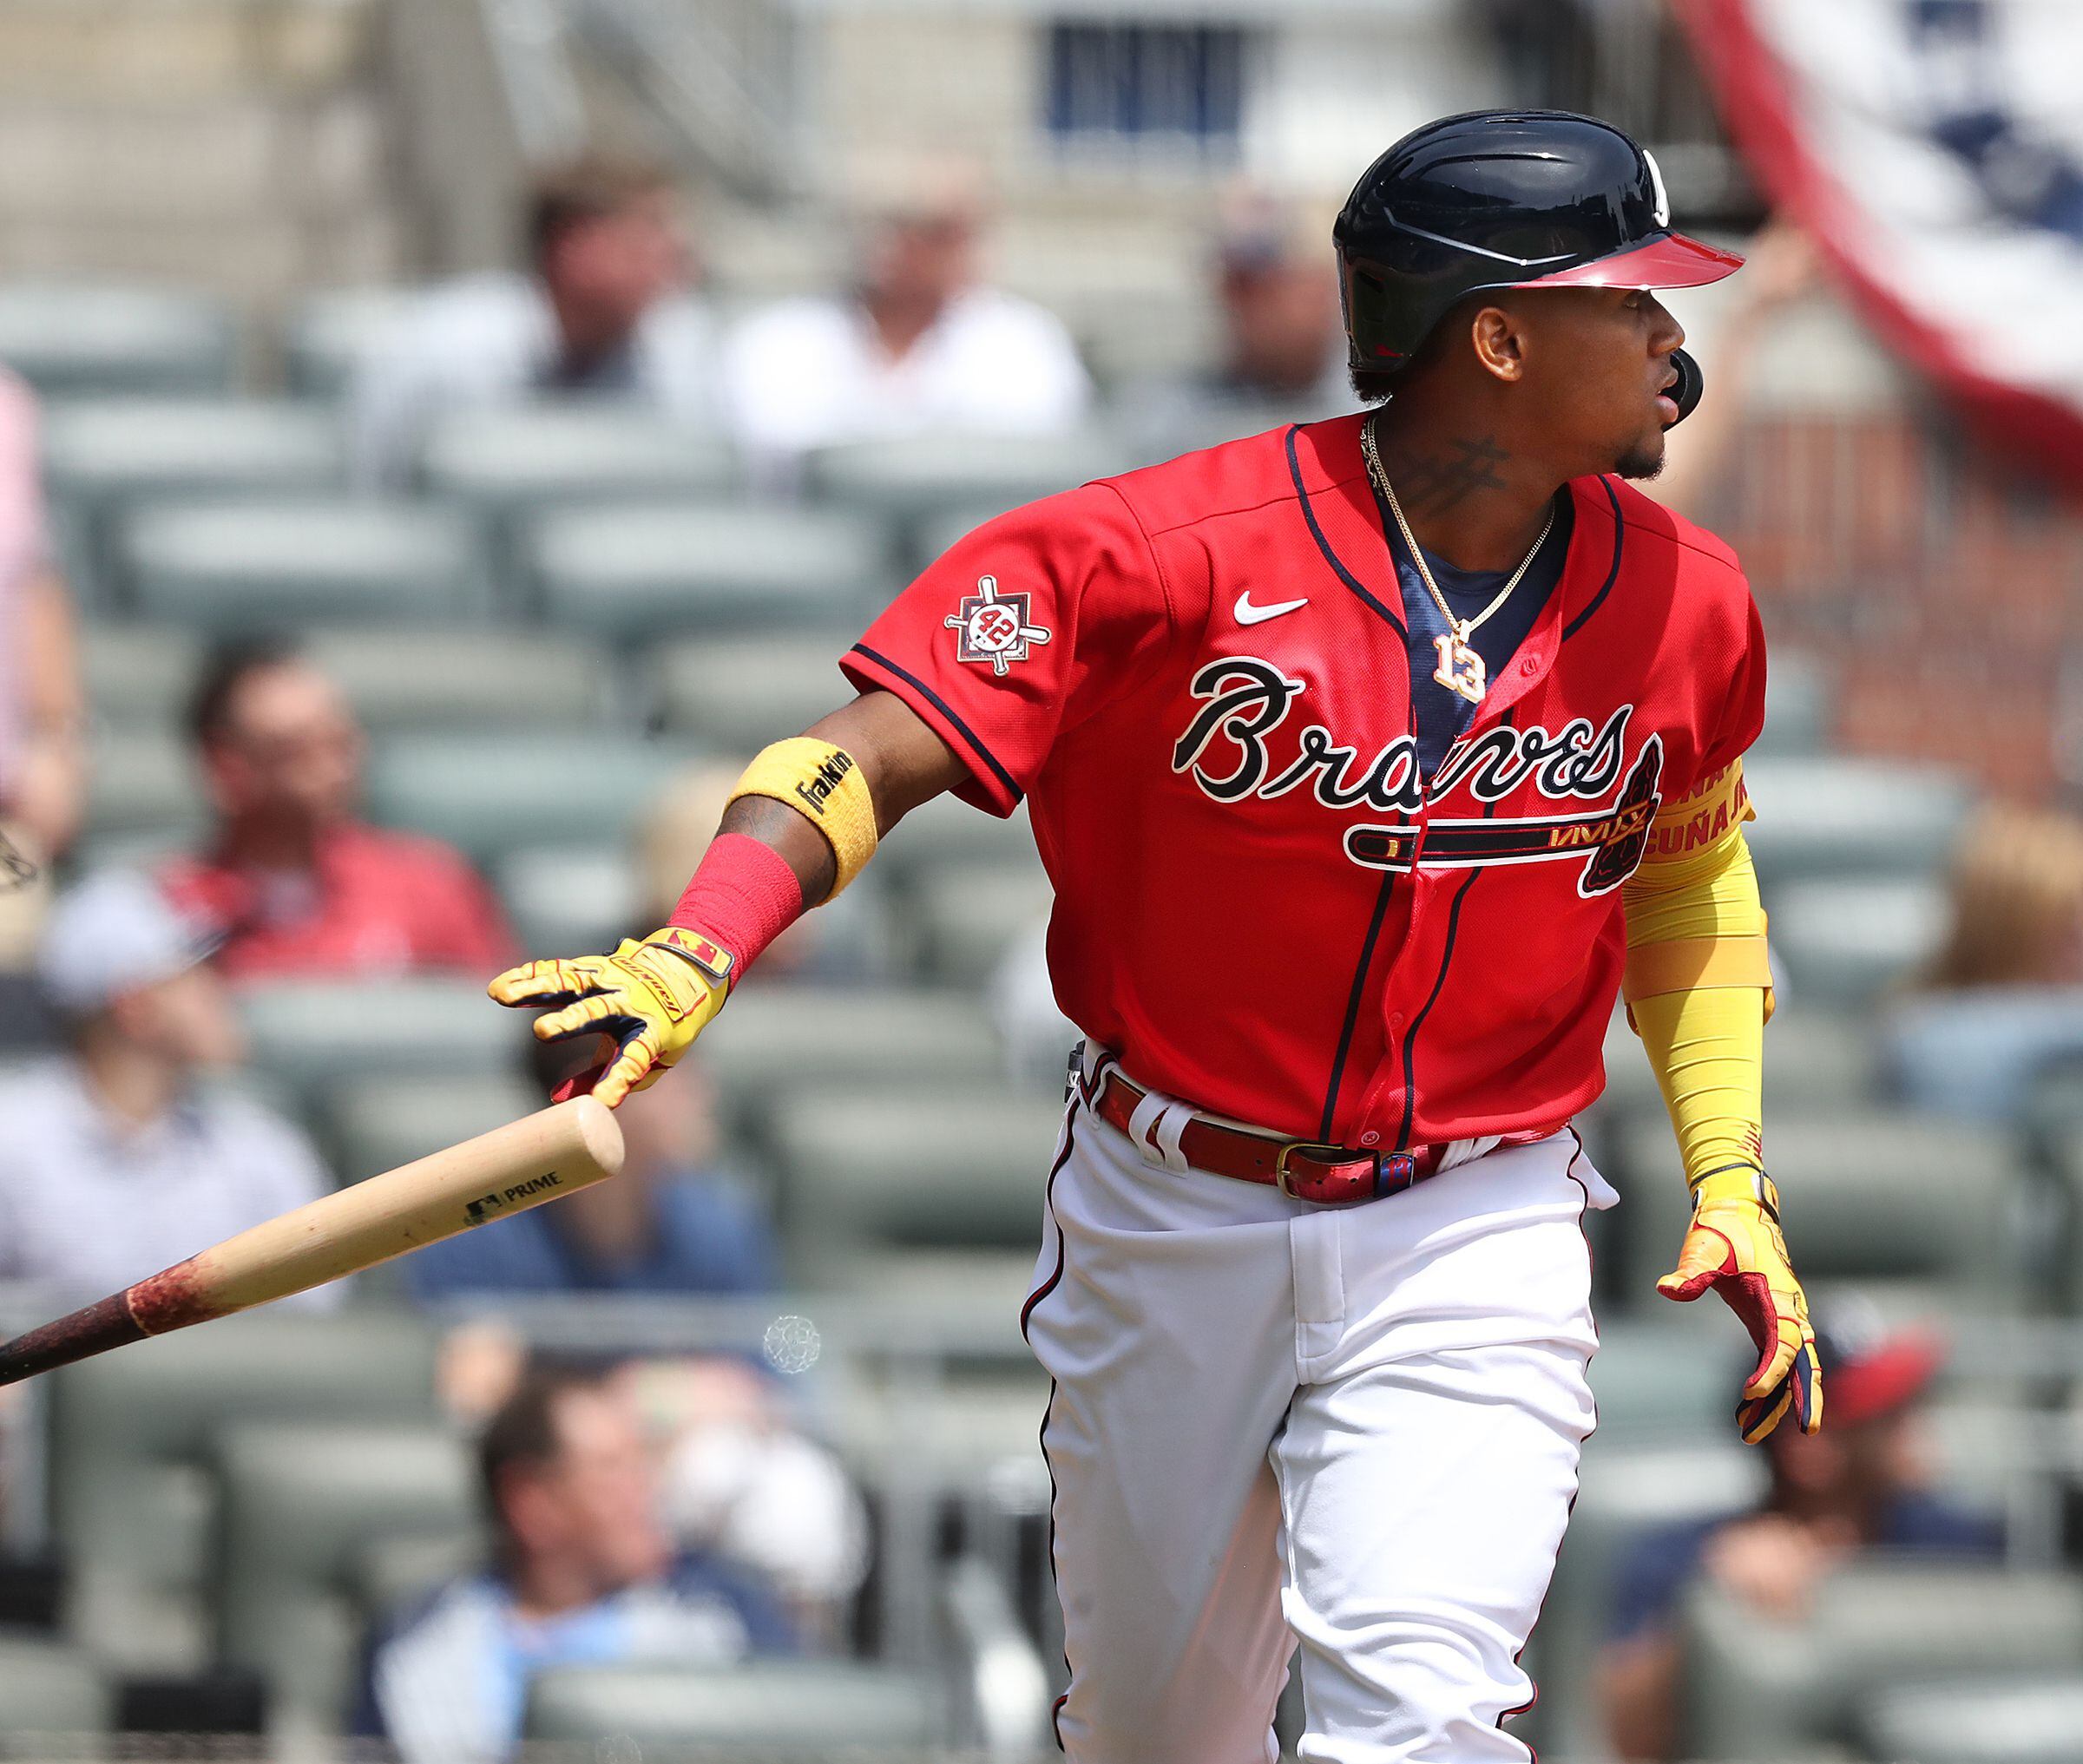 Photos: Braves defeat Marlins on Jackie Robinson Day